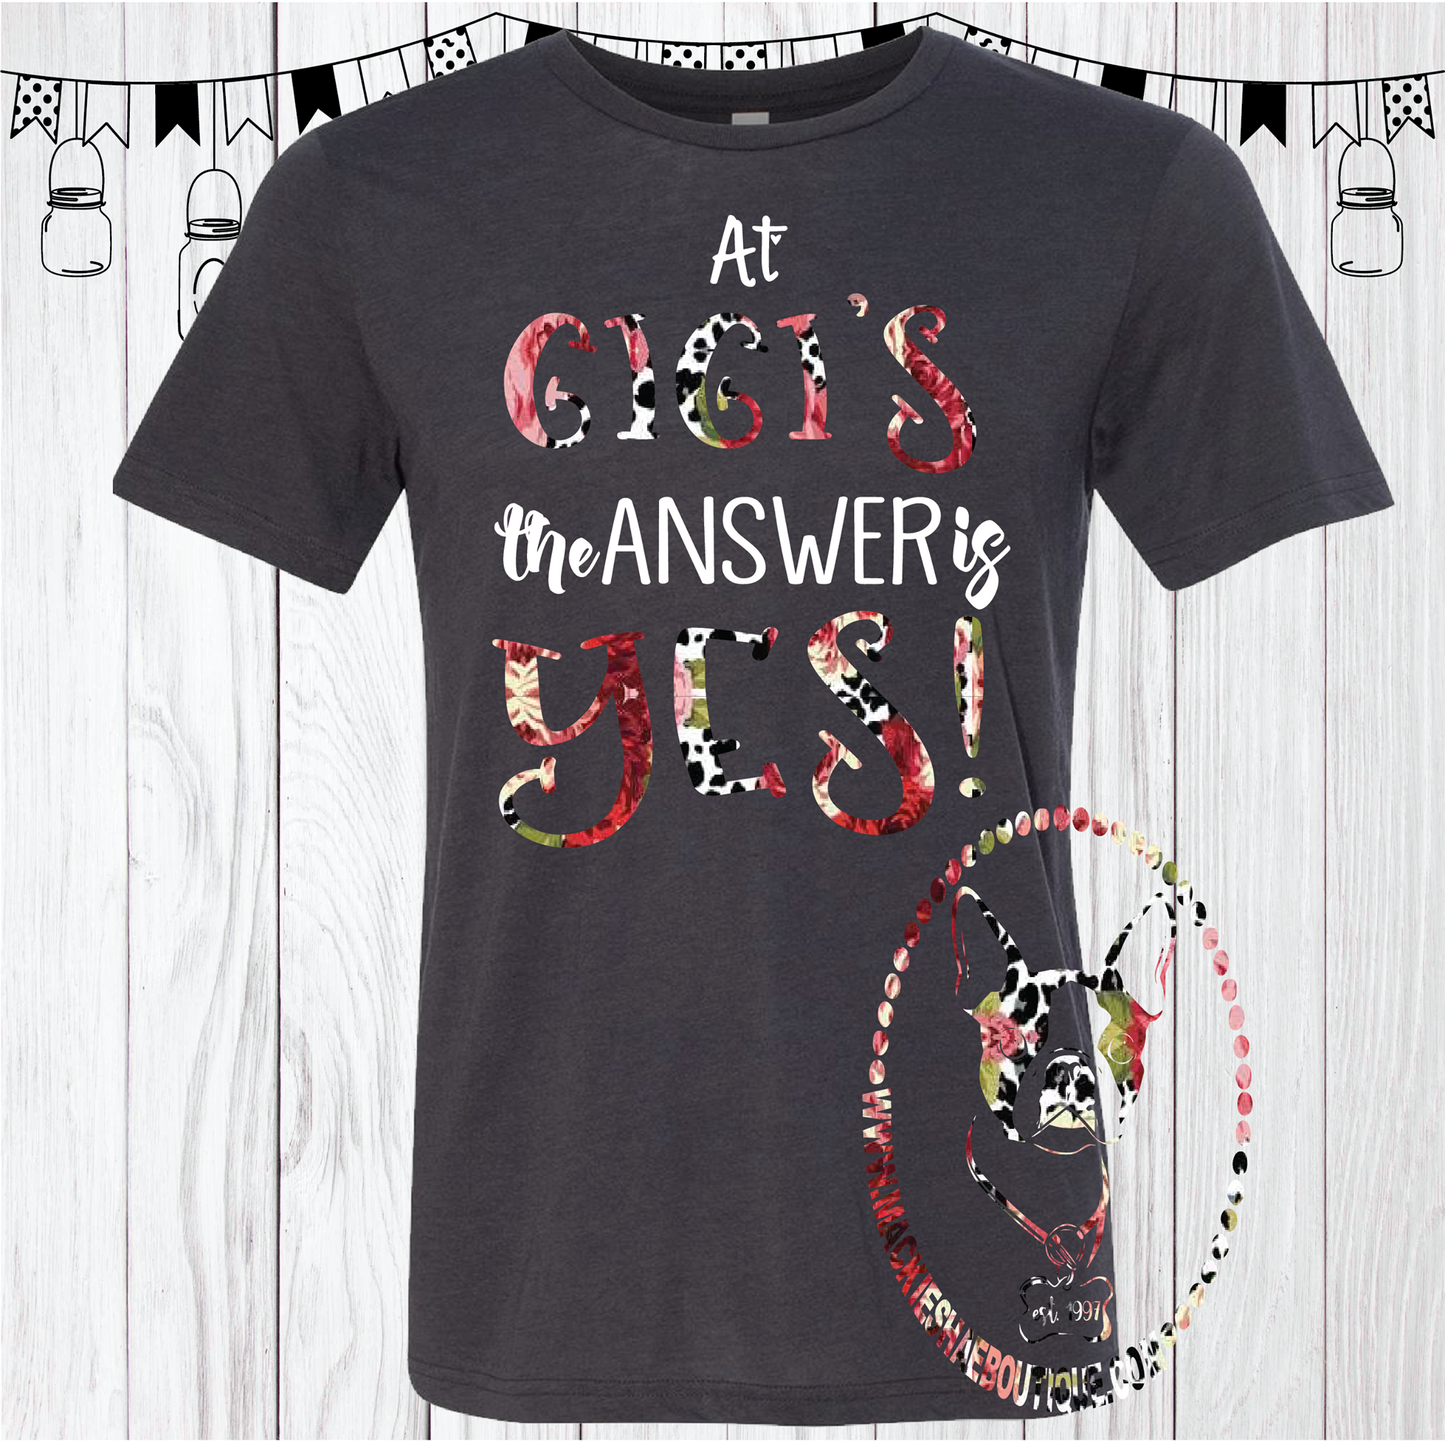 At Gigi's The Answer is YES! Custom Shirt, Short Sleeve (Gigi can be changed)